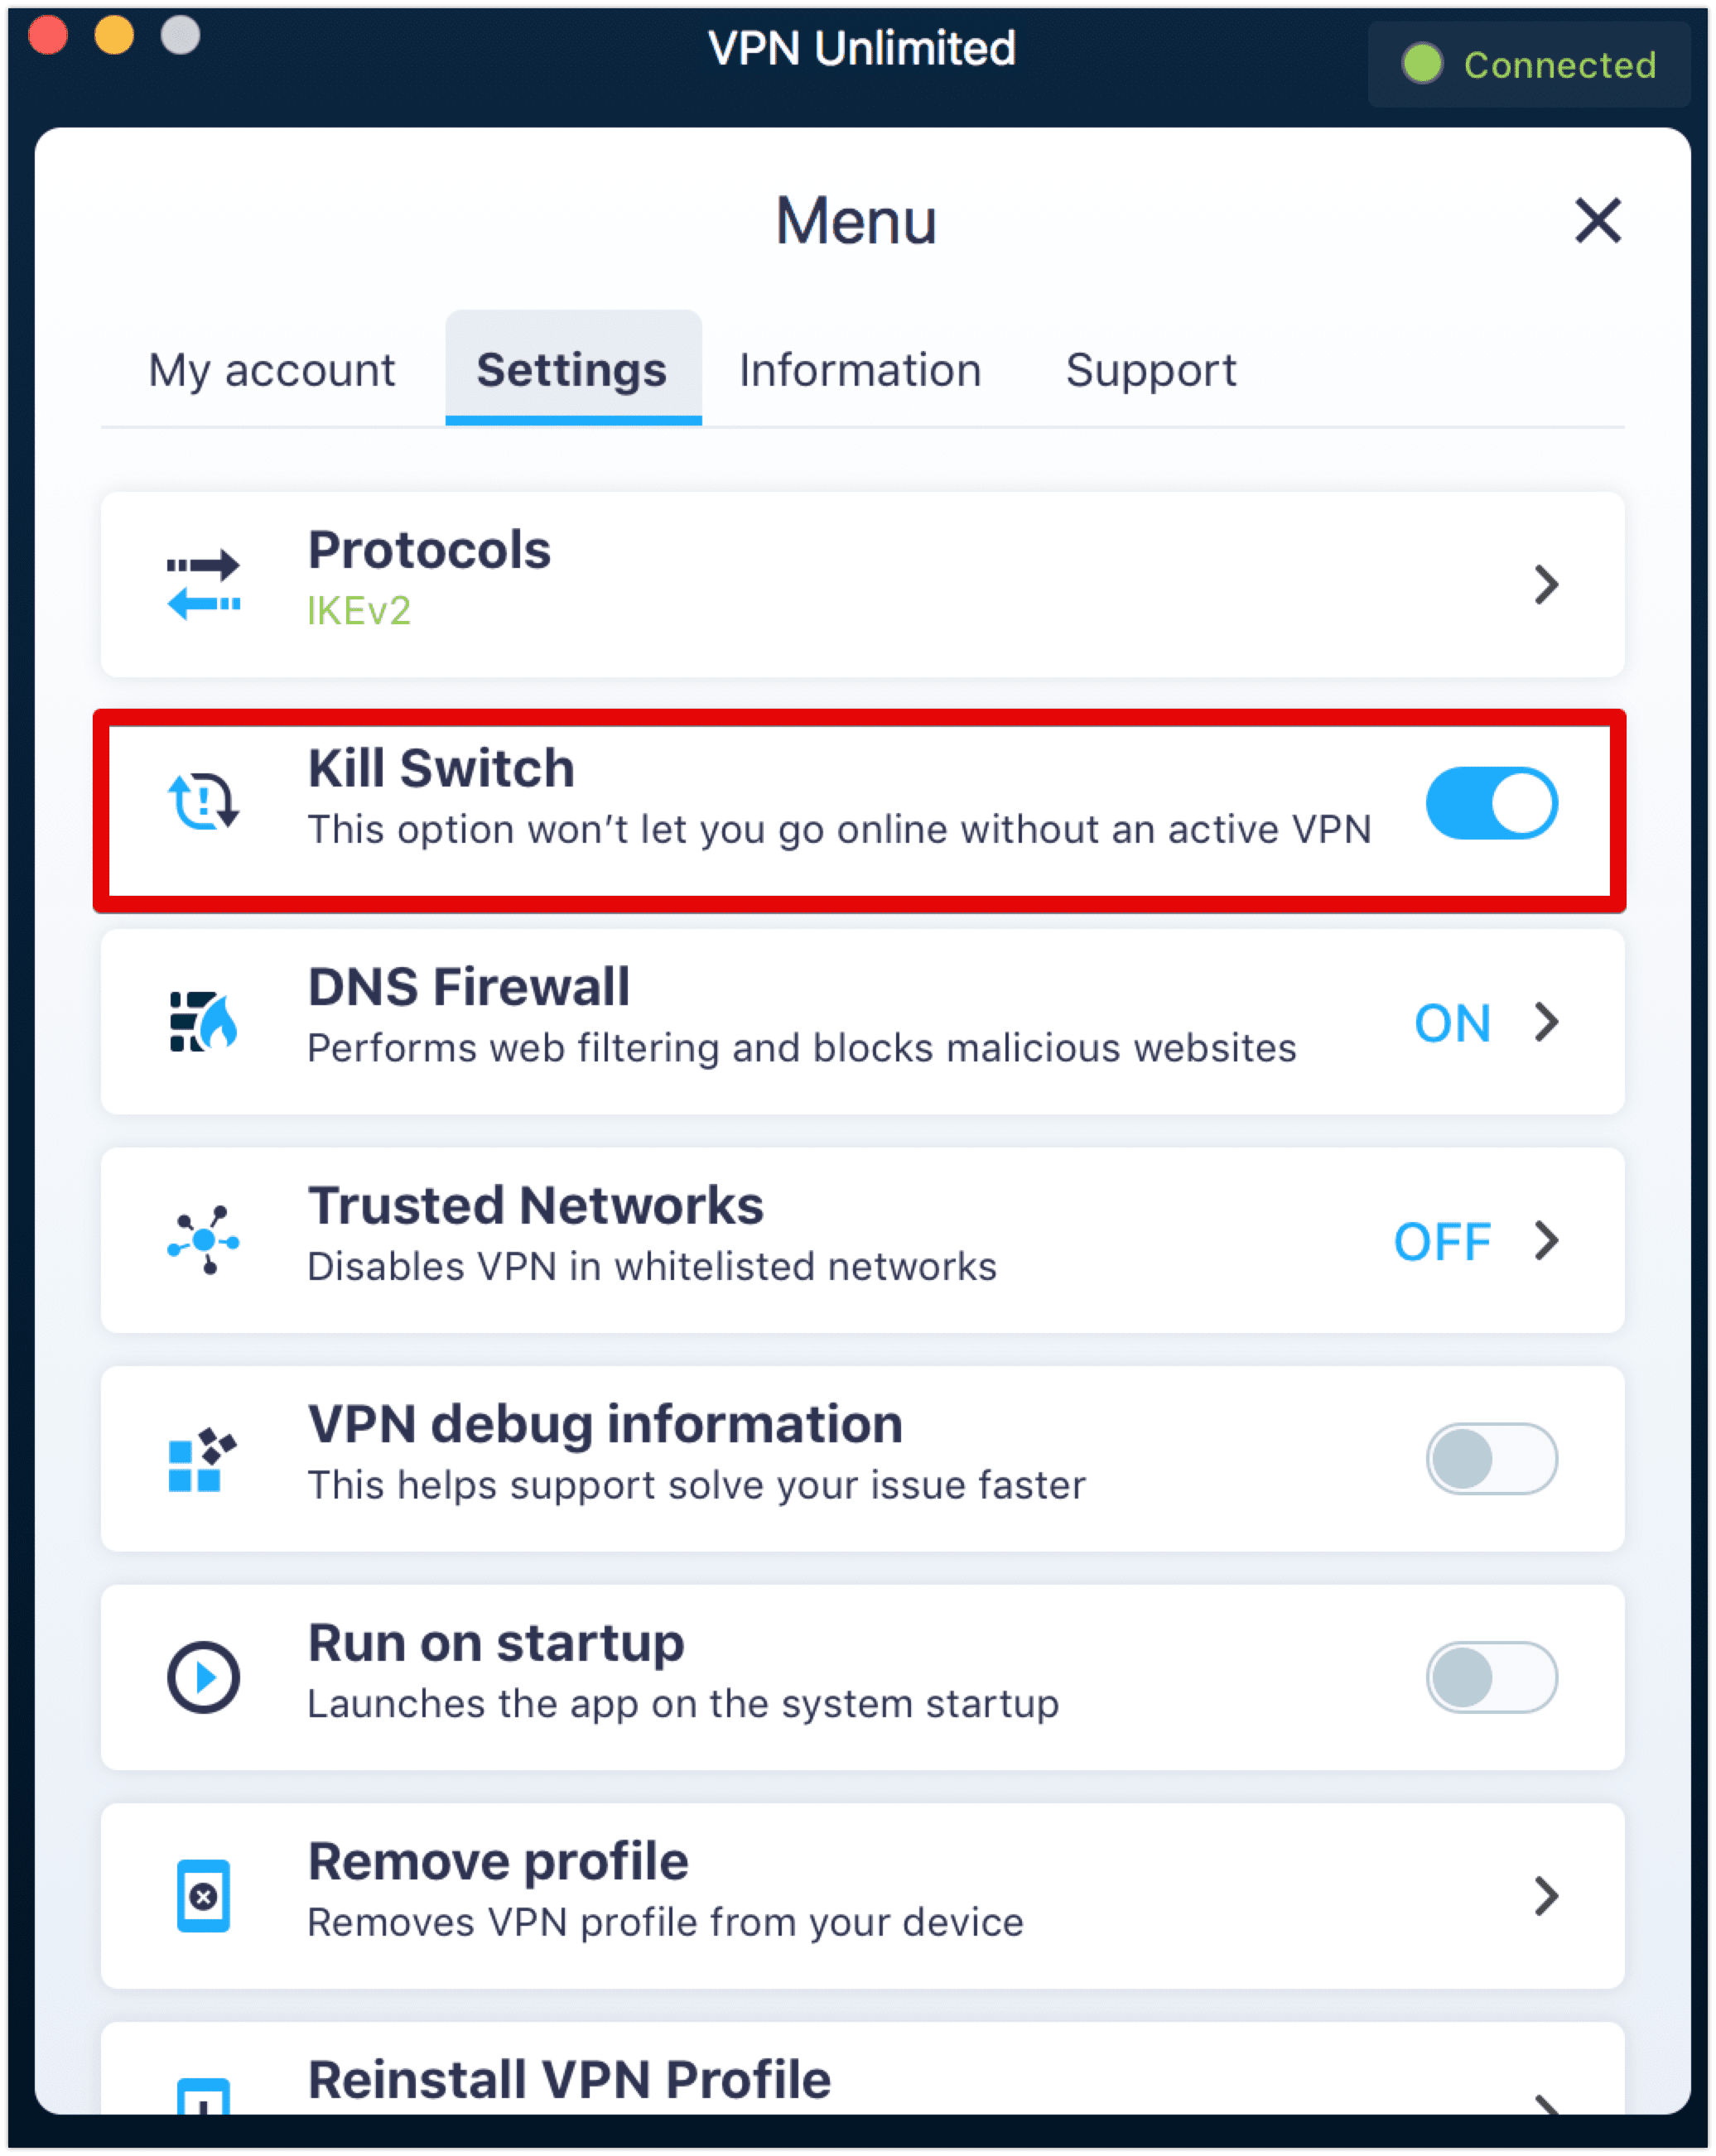 The Kill Switch feature in VPN Unlimited on macOS